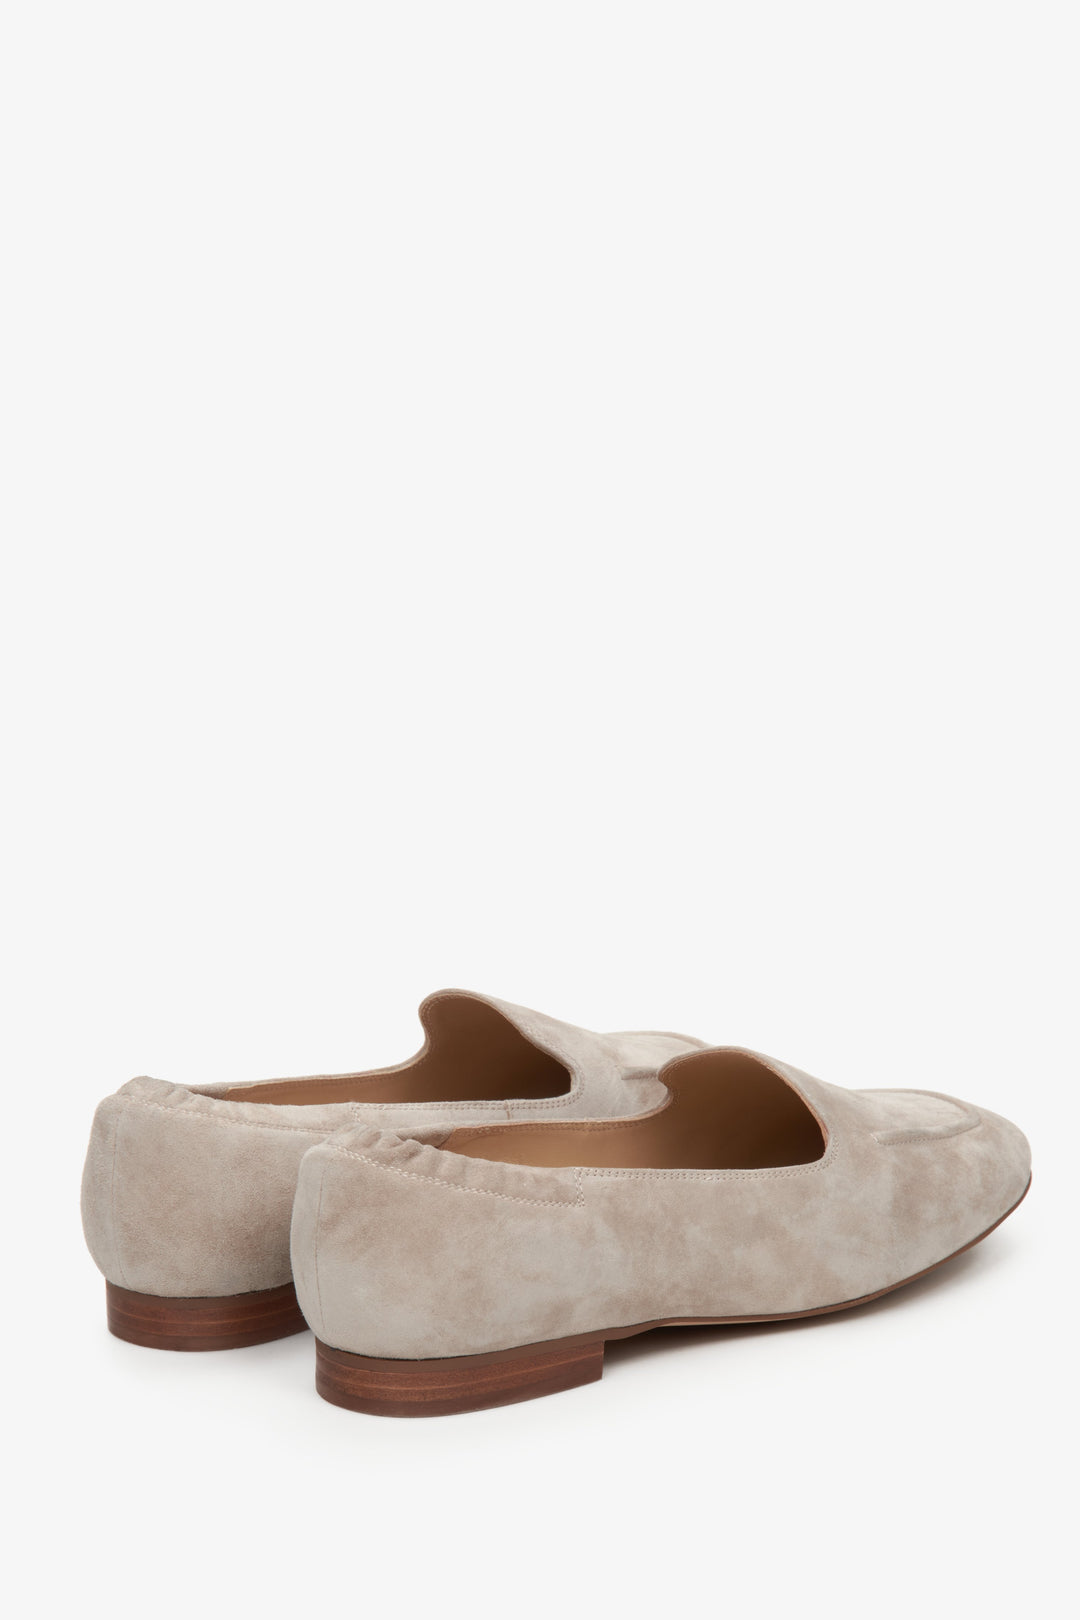 Women's Estro velour moccasins for fall in beige - presentation of the heel and side vamp.